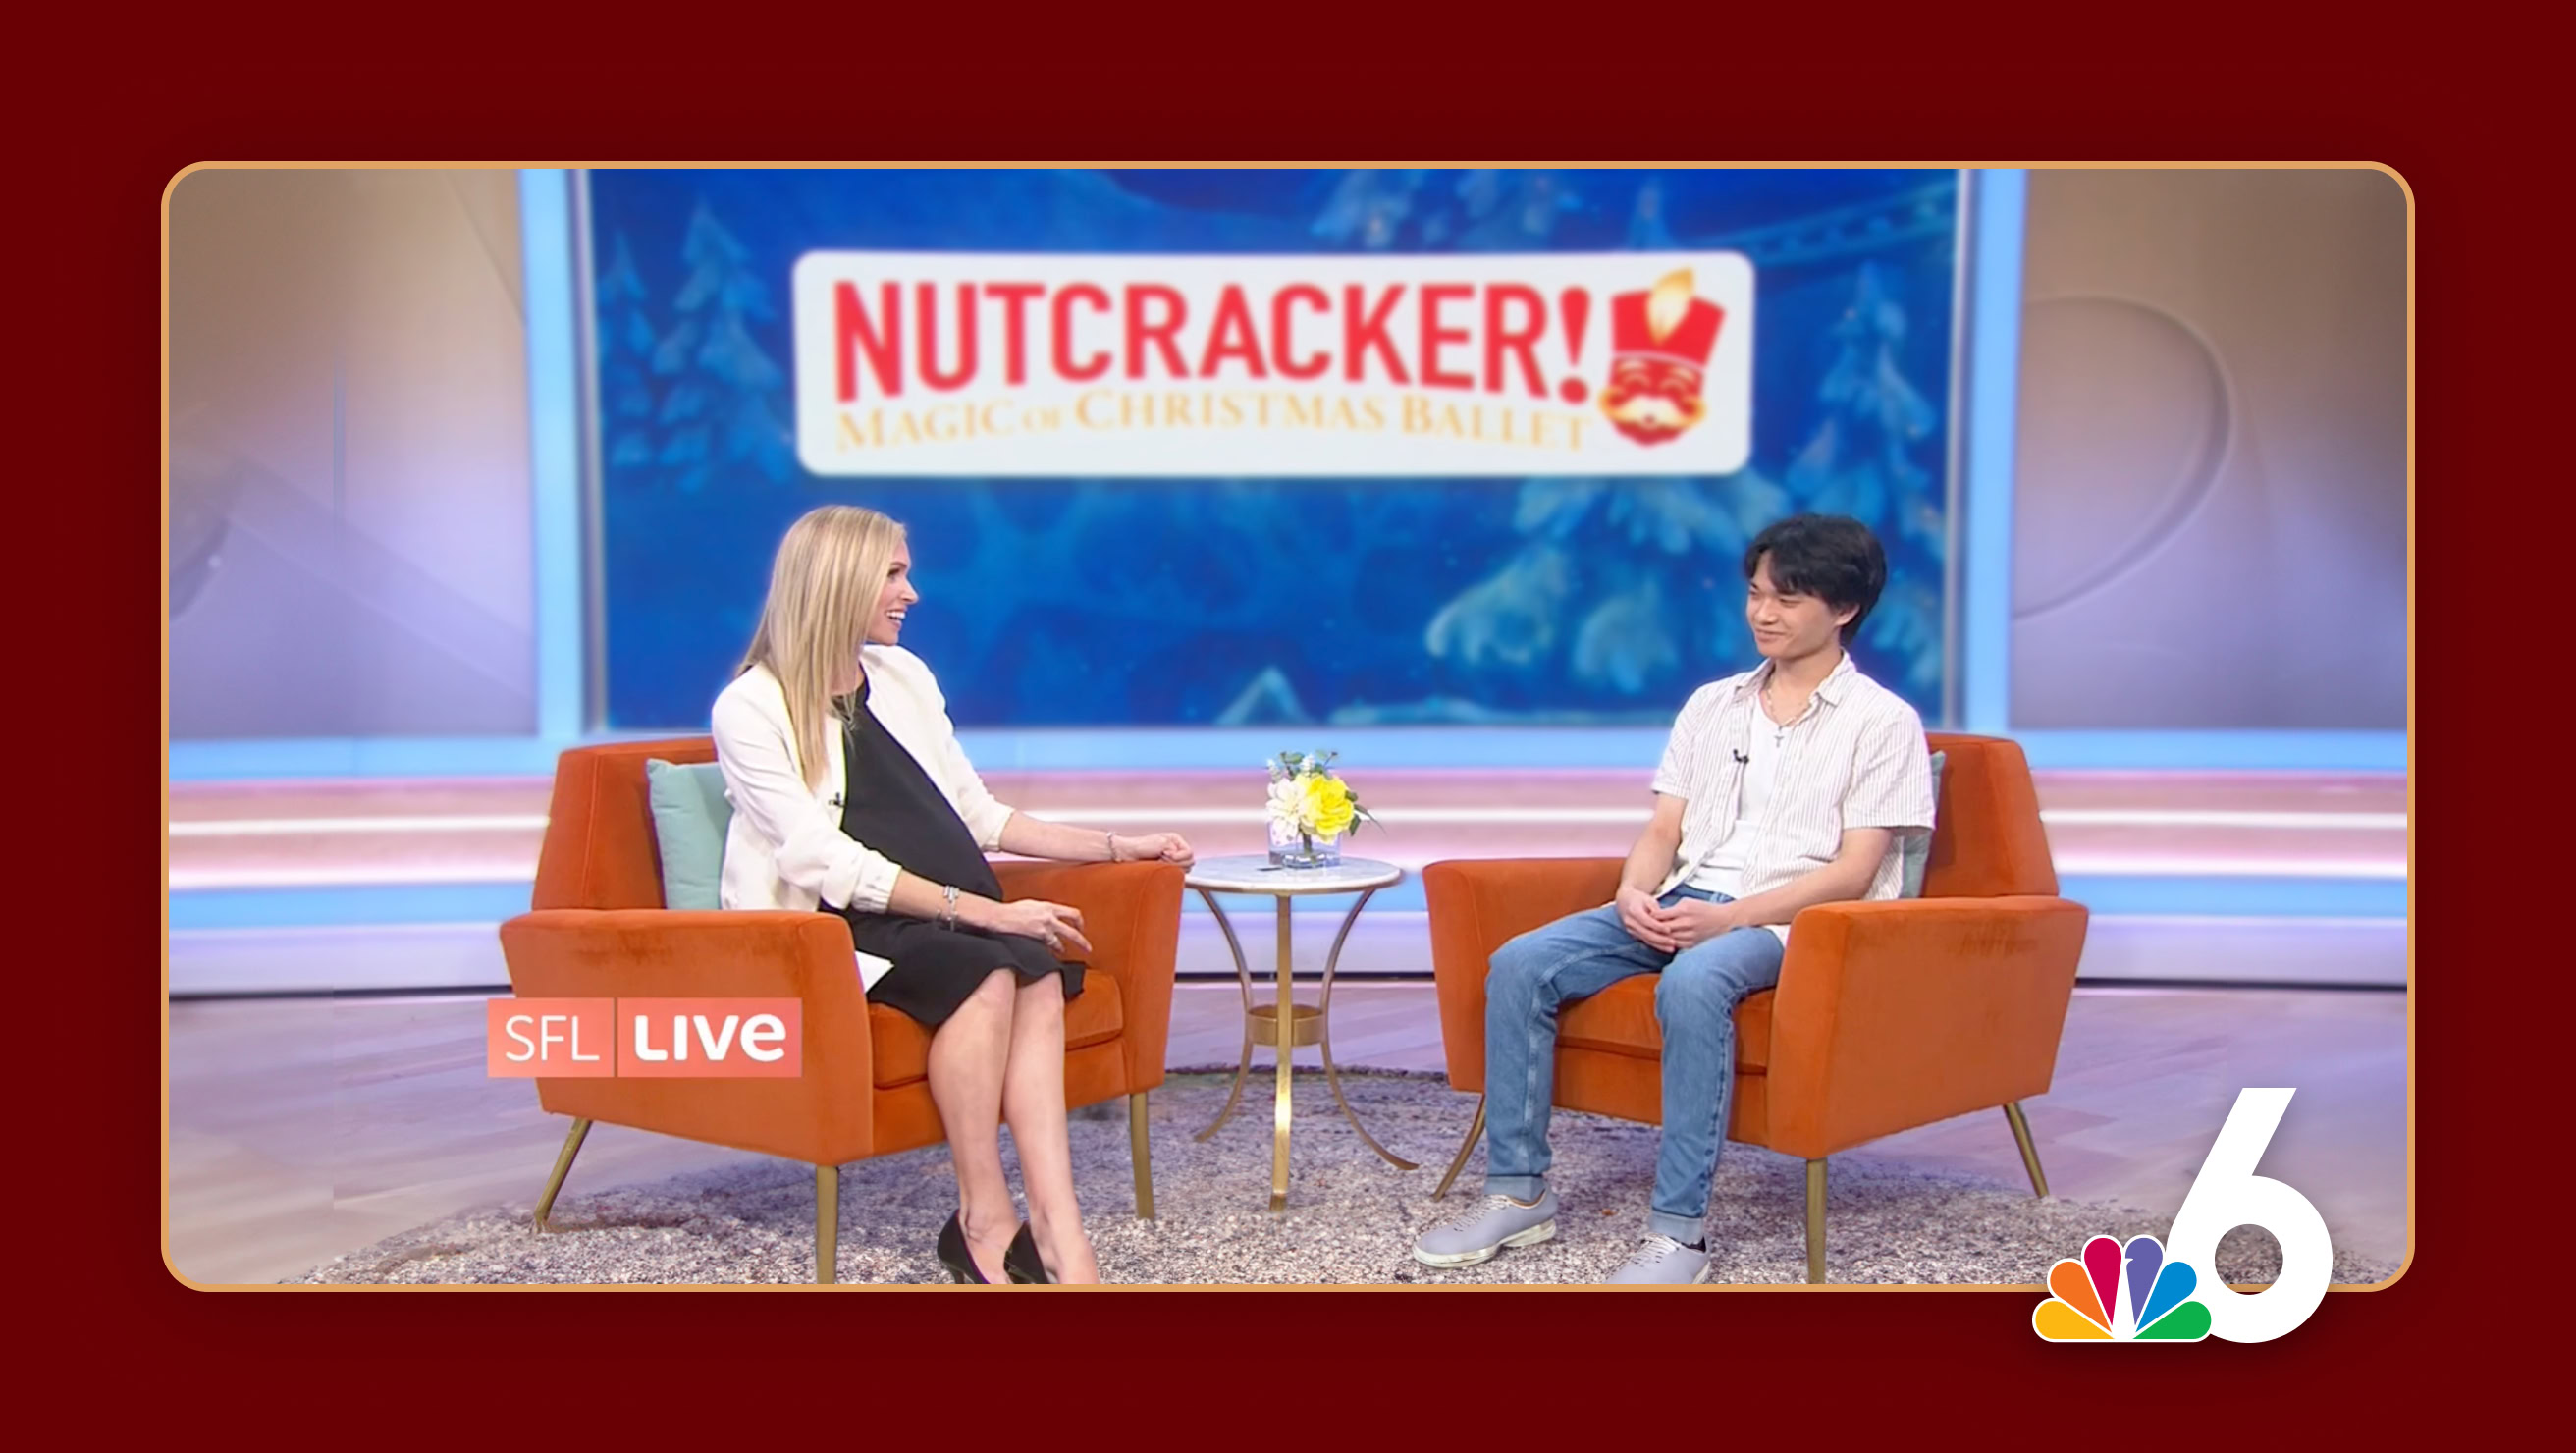 Two people seated in orange chairs on a tv set for Channel 6 news, having a conversation, with a blue background displaying the Nutcracker logo.